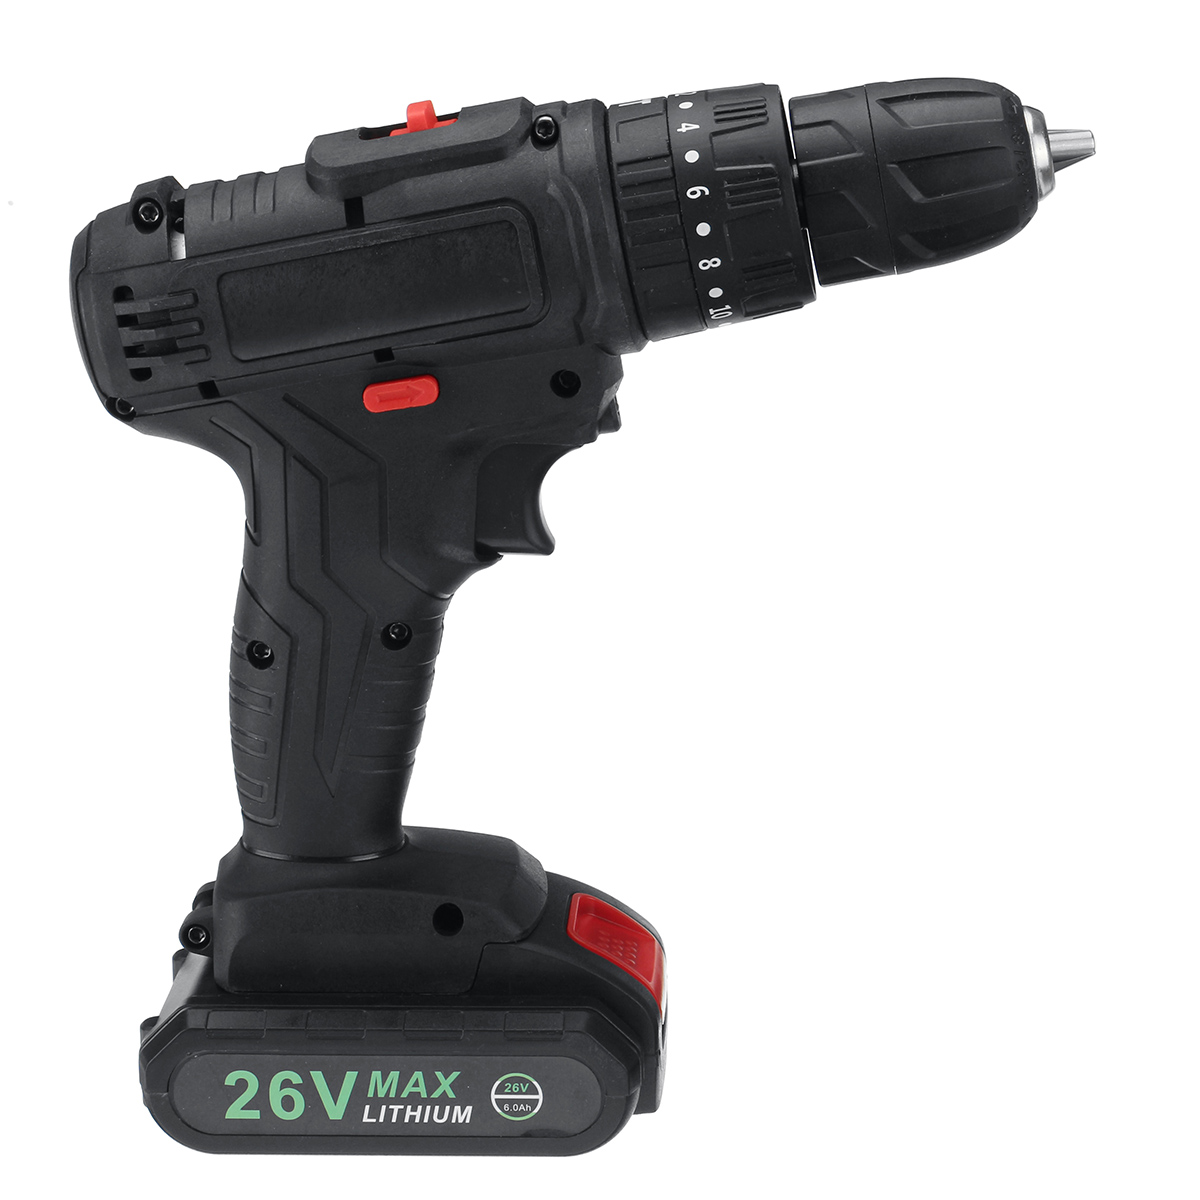 48V-1500W-Impact-Electric-Drill-28Nm-Max-Torque-LED-Light-Screwdriver-Power-W-12pc-Battery-1768847-2